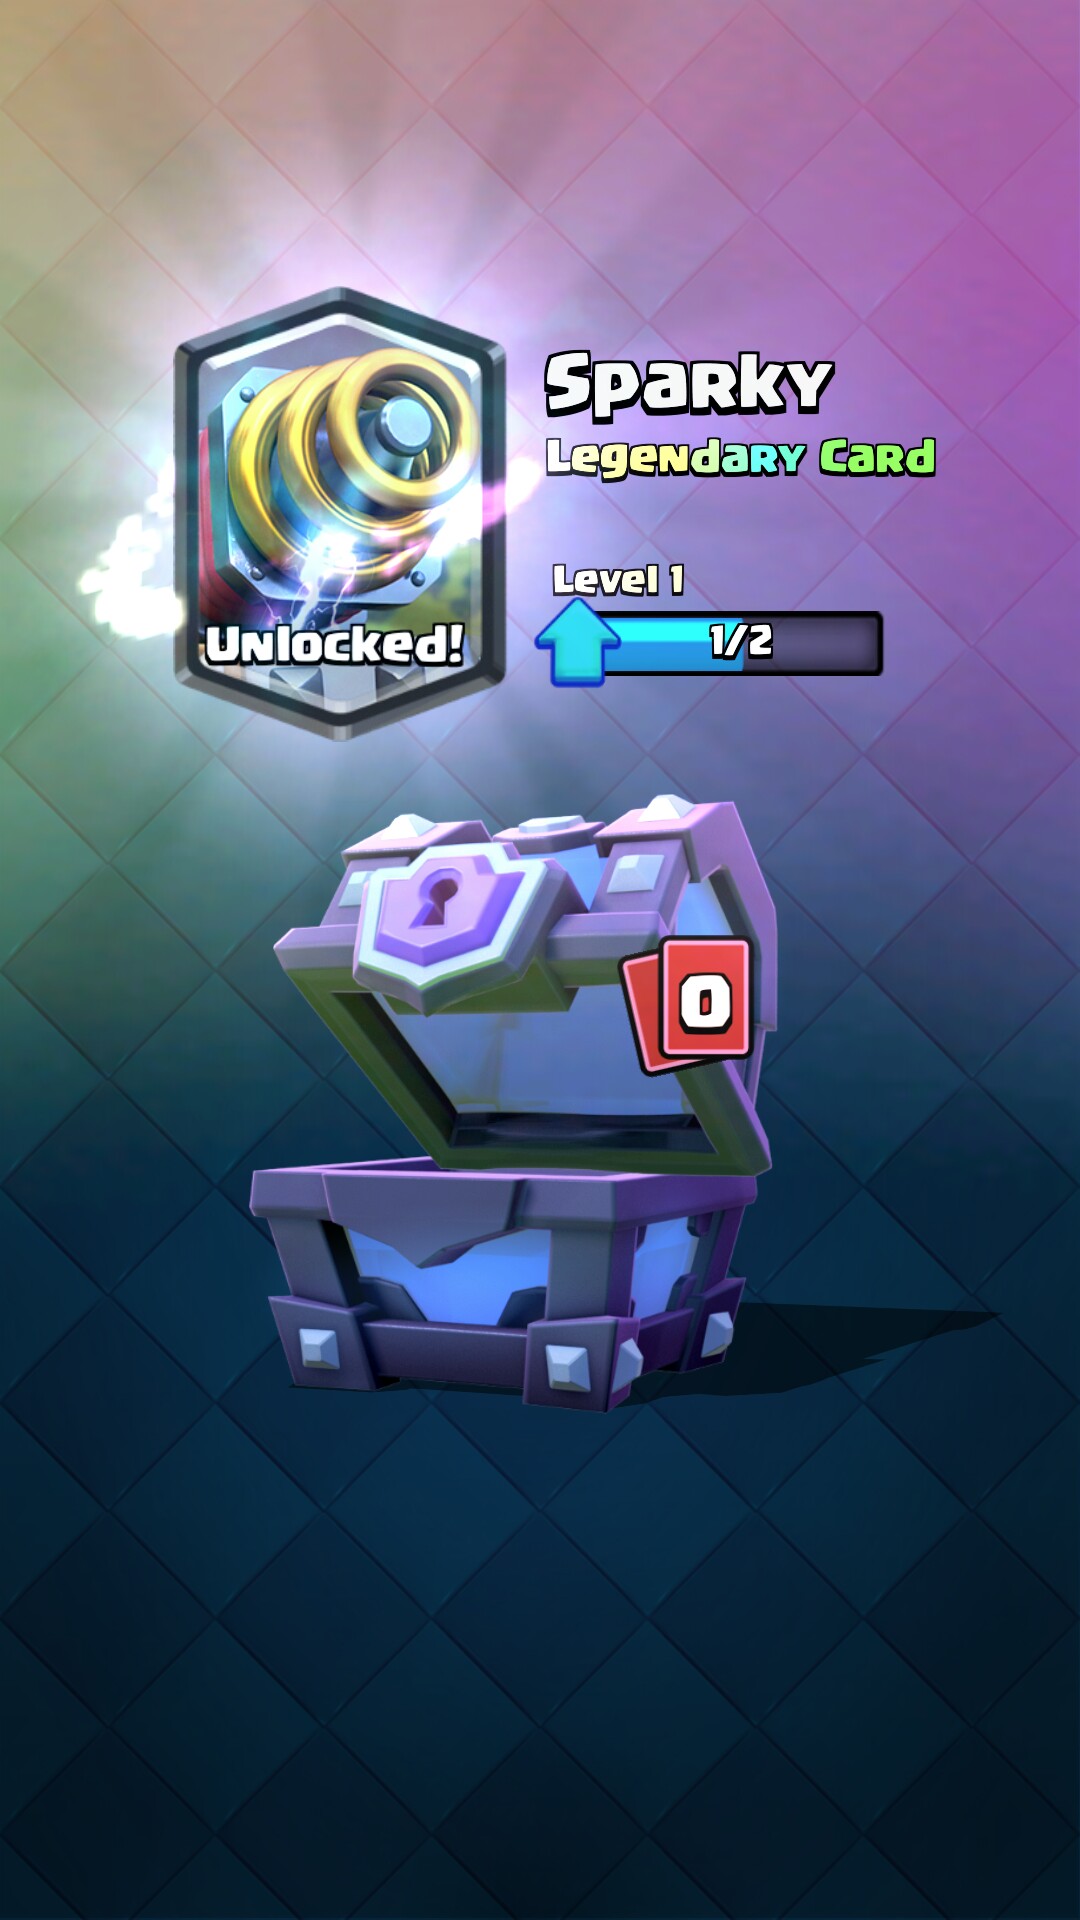 Sparky unlocked | Clash Royale | Pinterest | Clash royale and Video ...